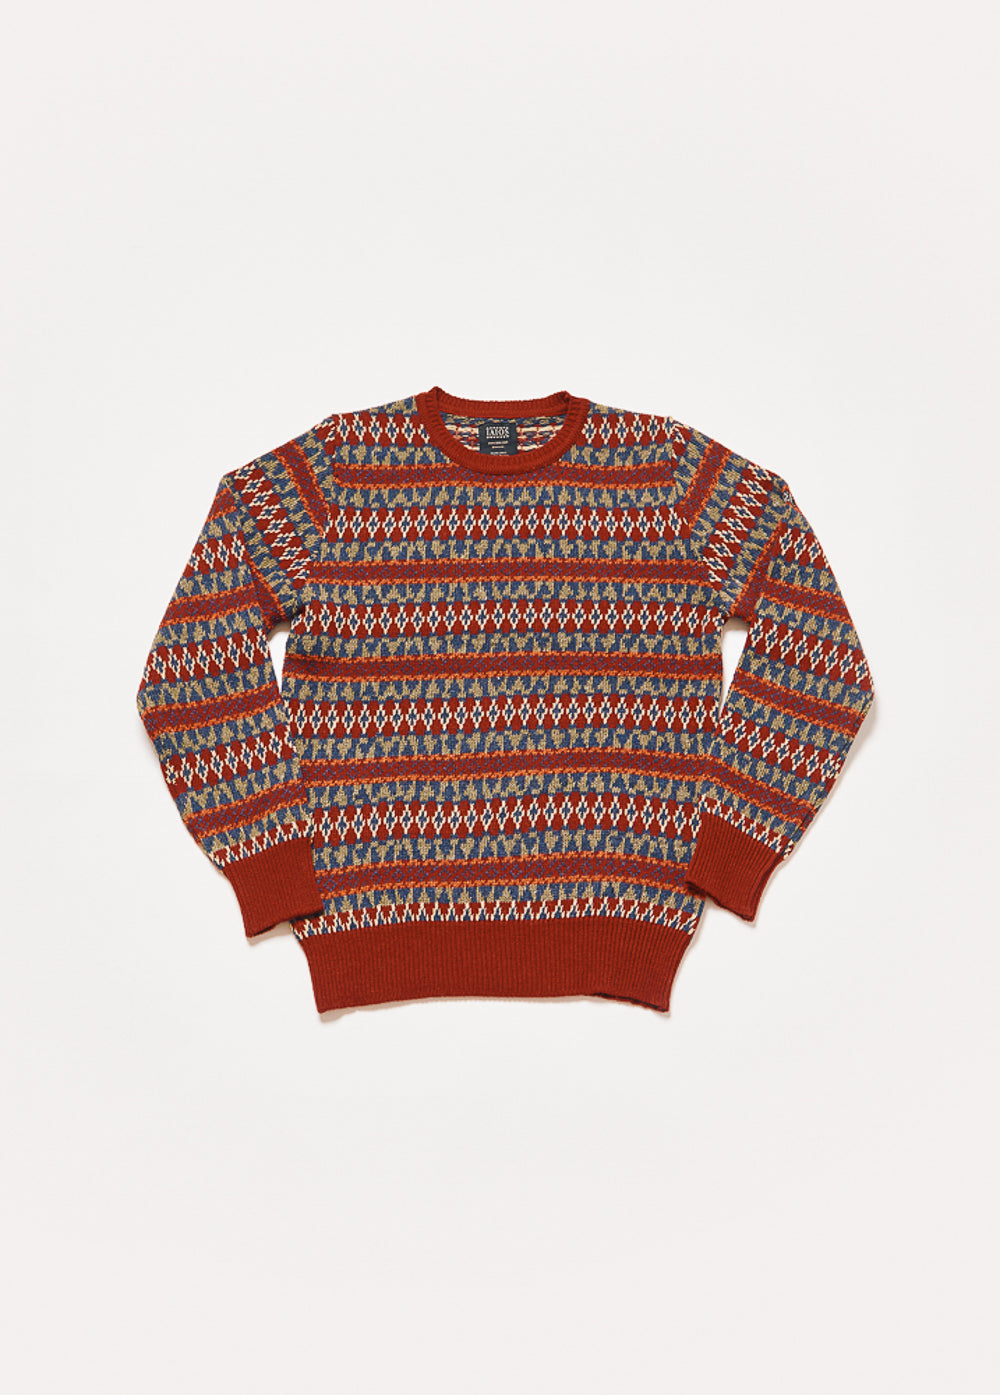 Men's or unisex knitted sweater in red and green tones. It is a jacquard of 5 colors so you get a Christmas sweater result. 